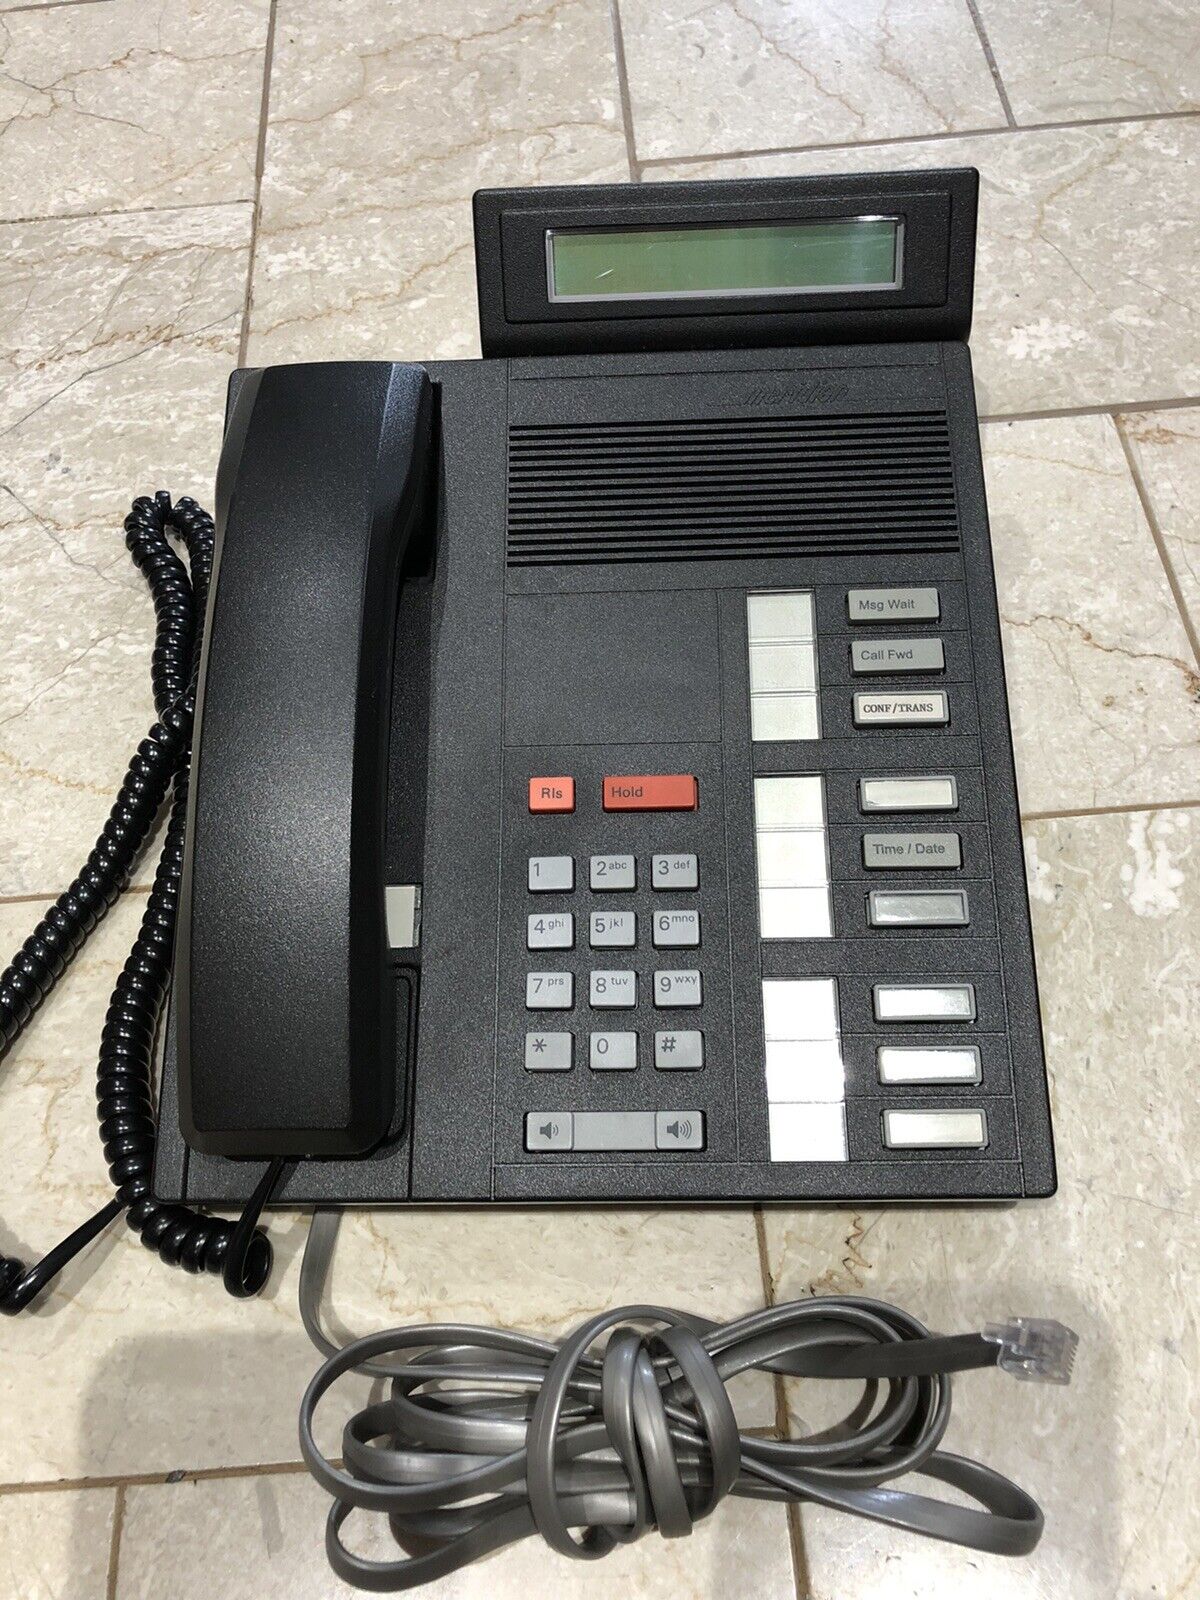 Nortel Meridian M5209 / NT4X36 Black 9 Button Display Office Business Phone